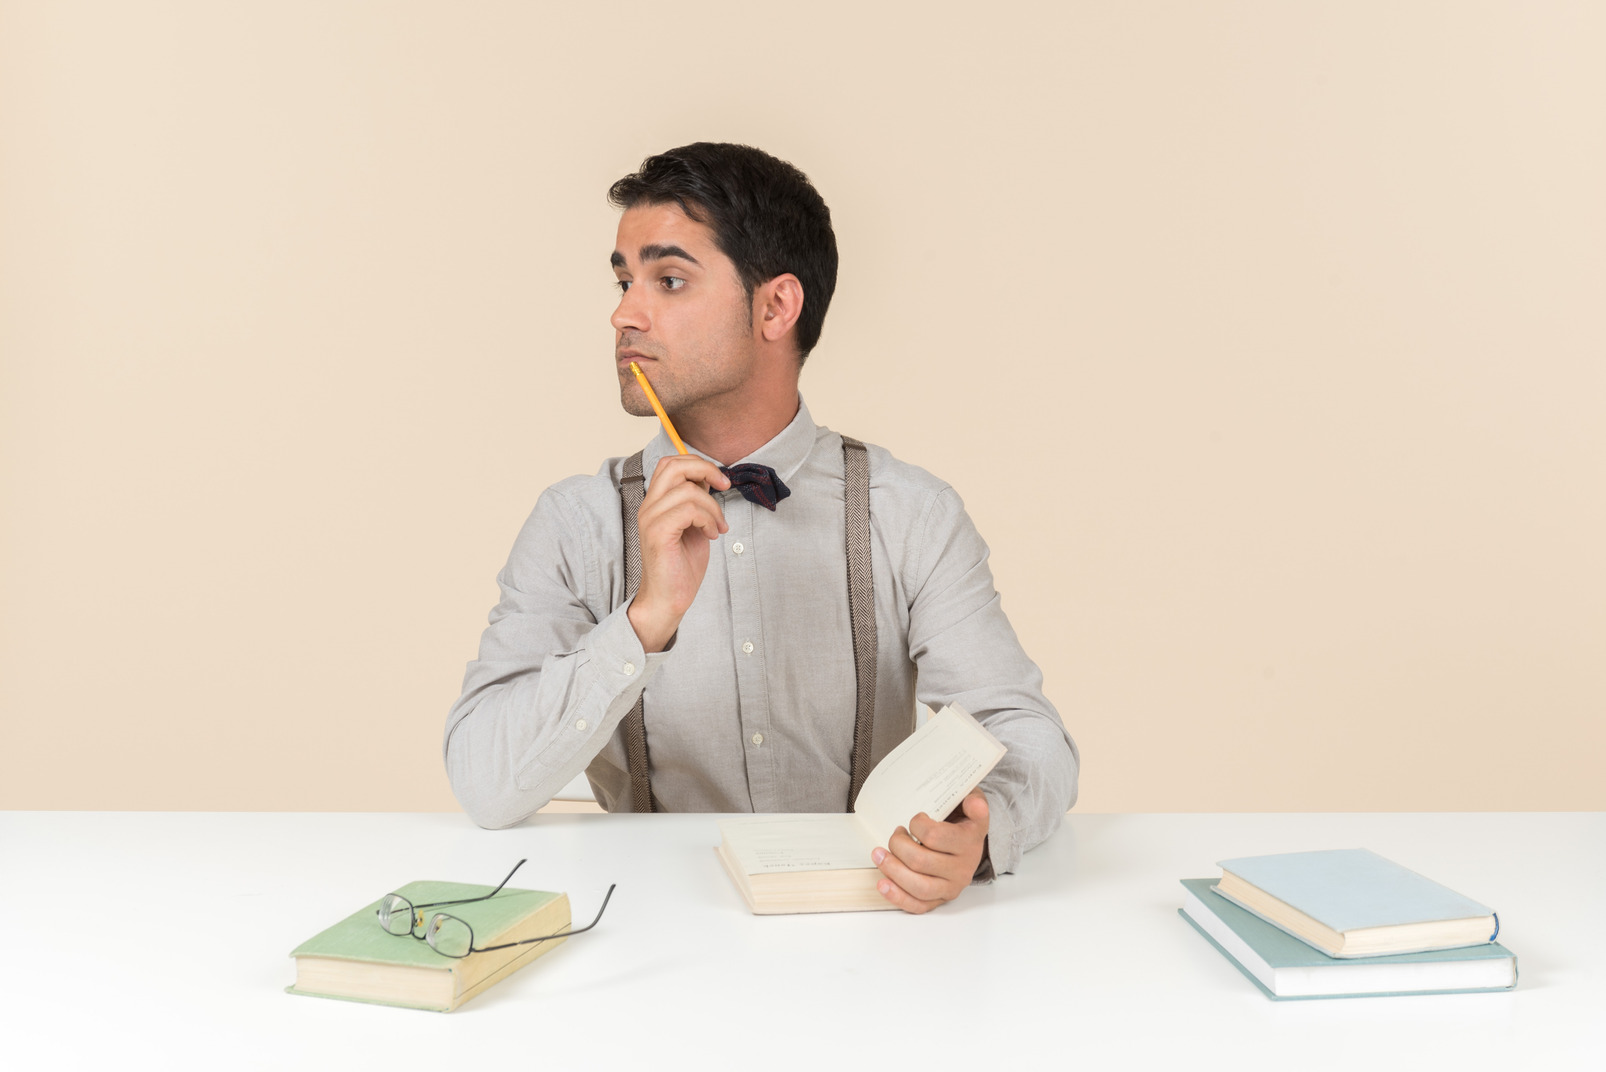 Pensive adult student sitting at the table with opened book